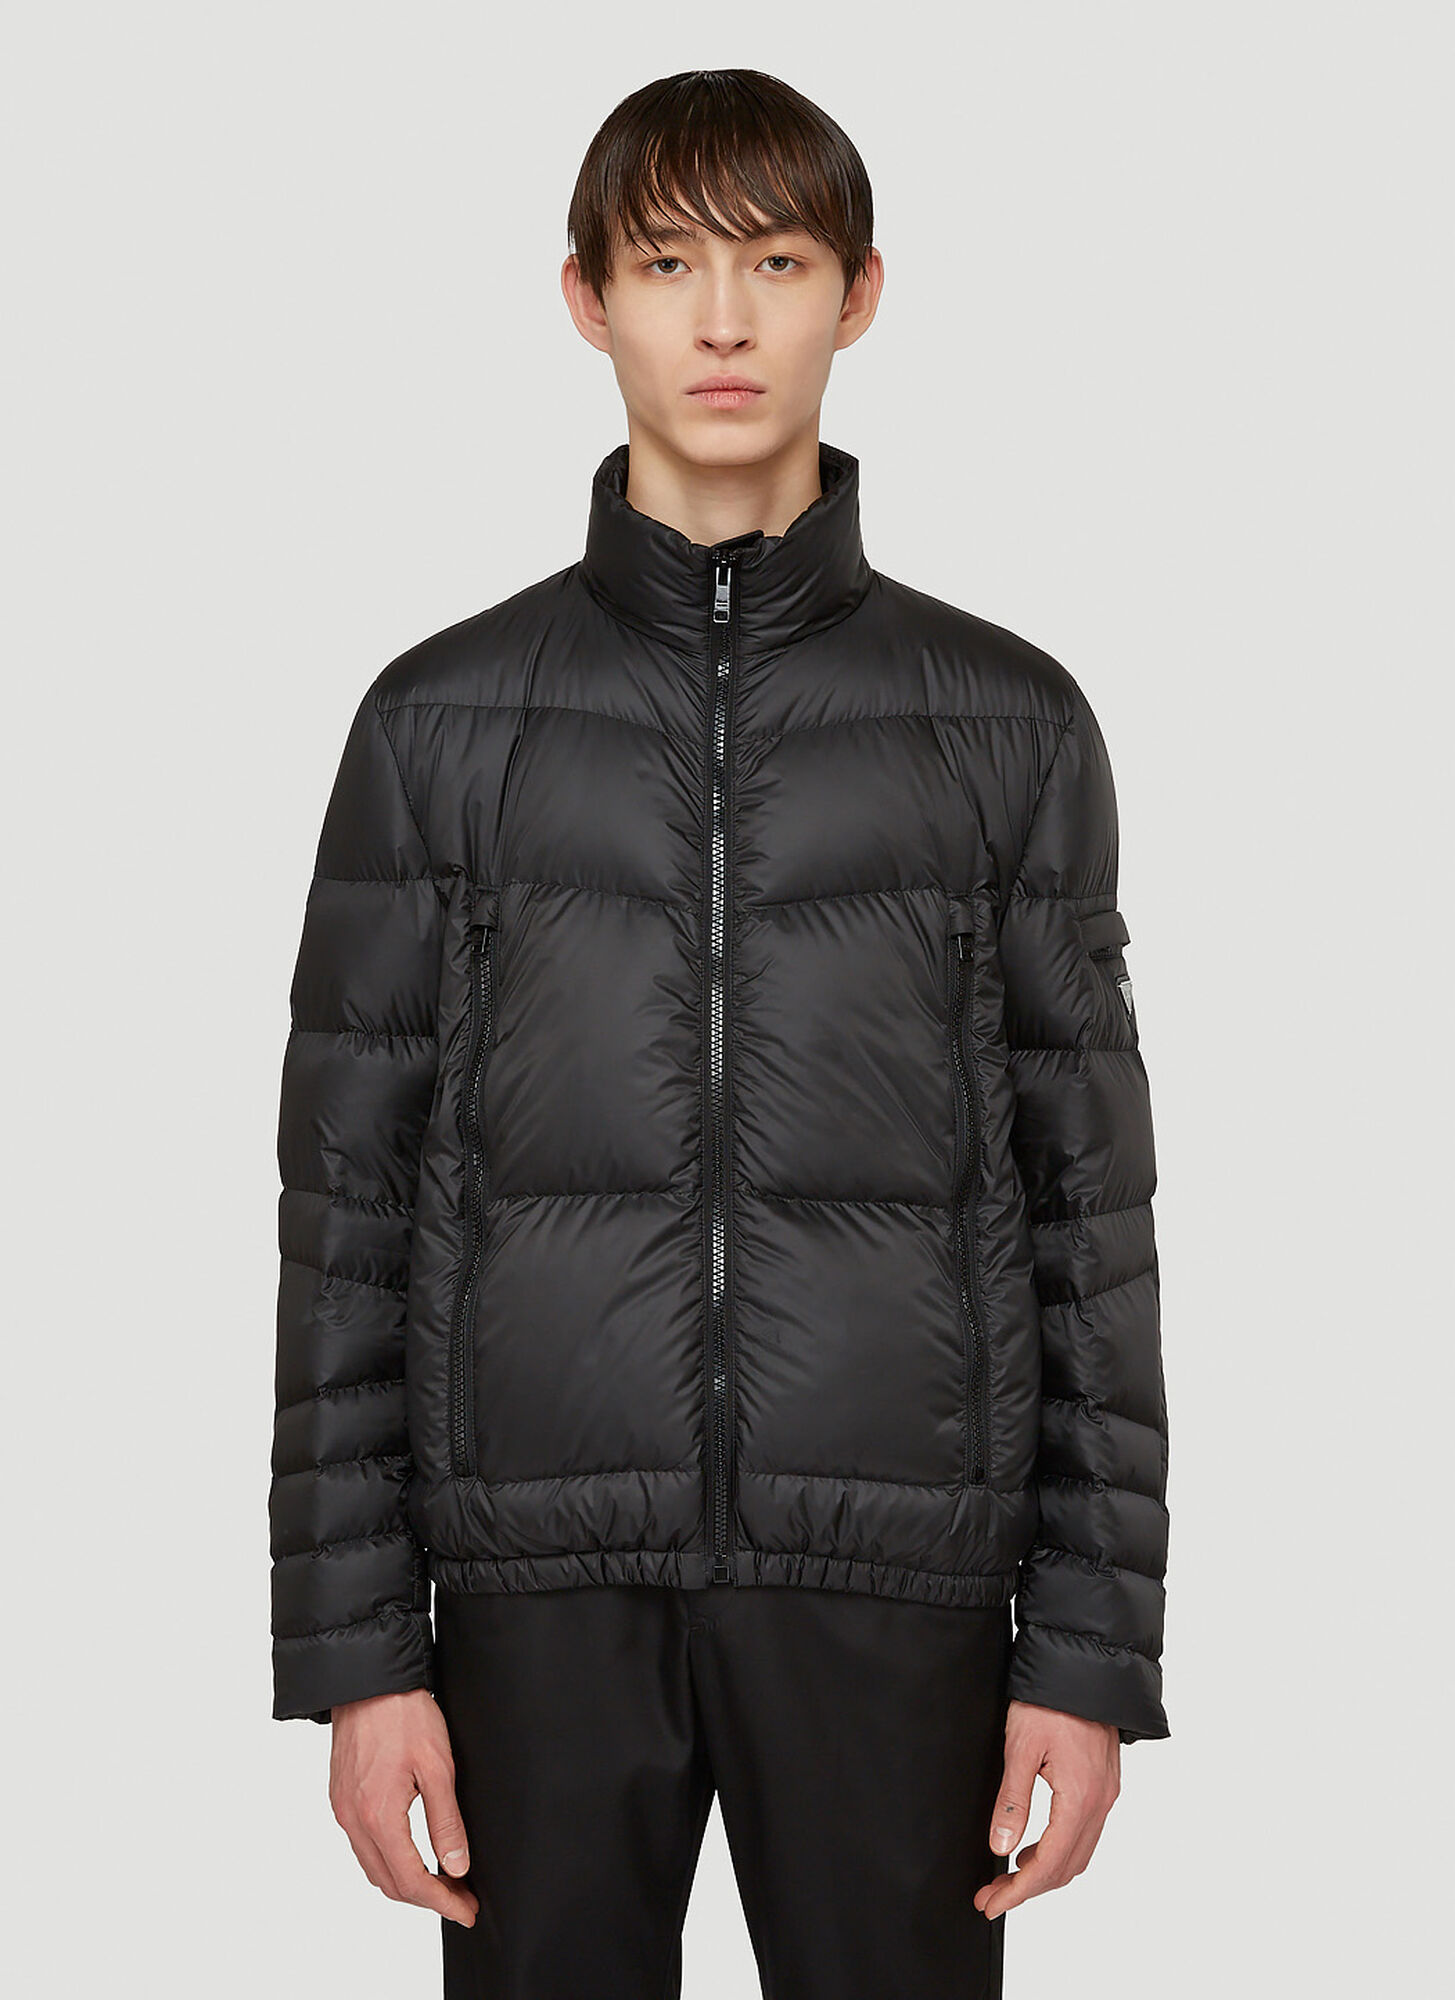 Prada Quilted Puffer Jacket in Black size IT - 50 | The Fashionisto